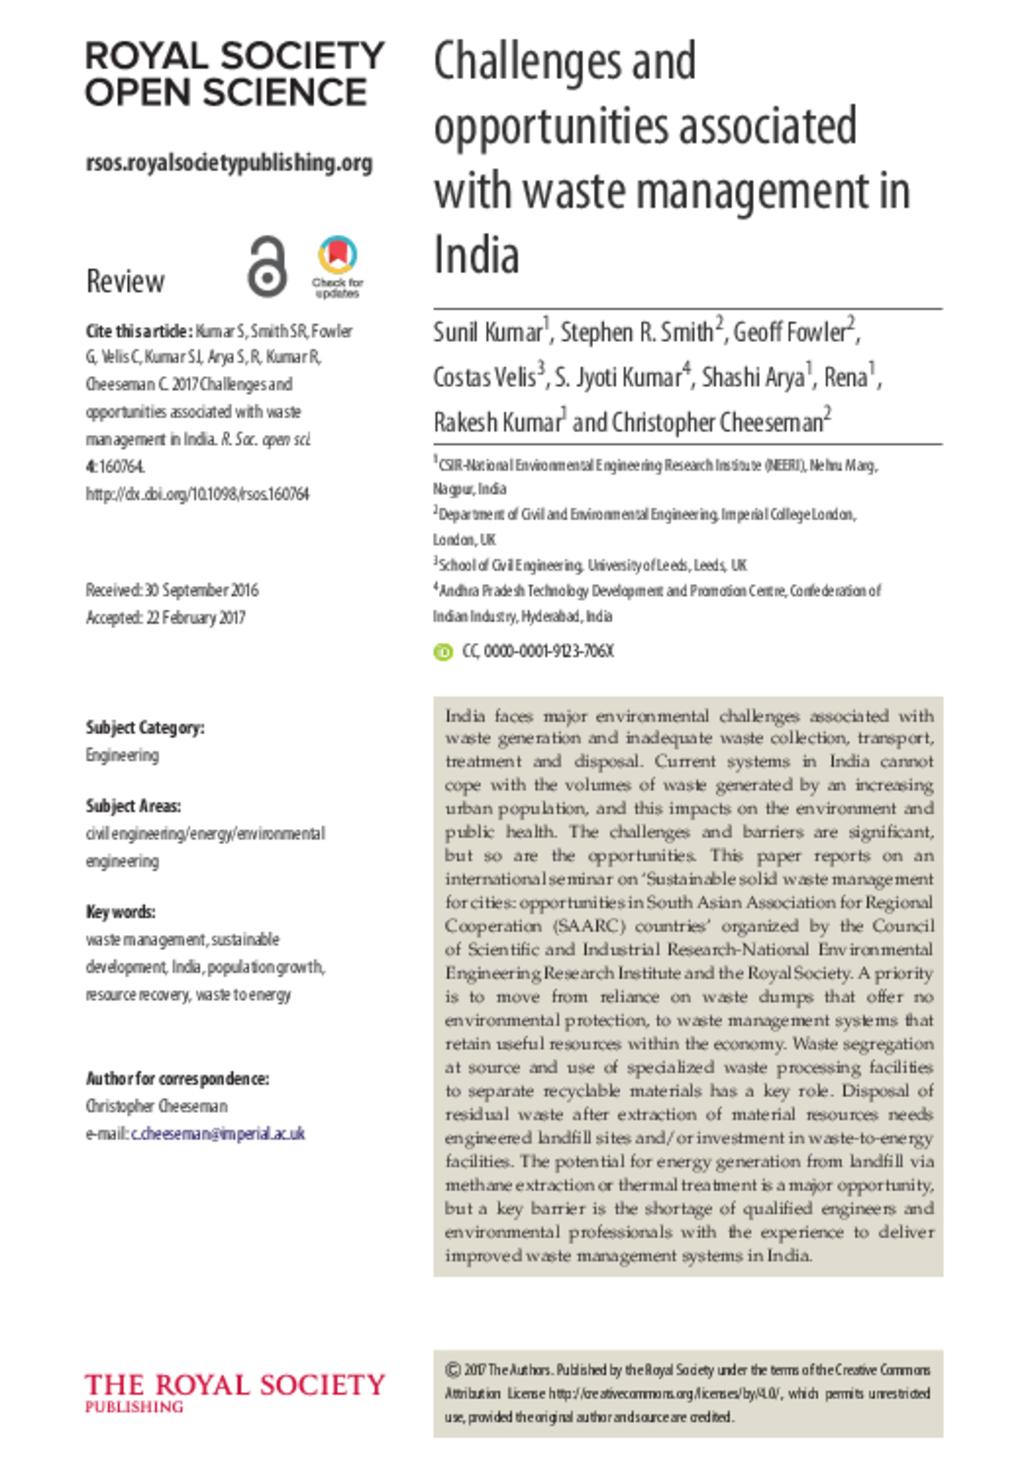 Challenges and opportunities associated with waste management in India